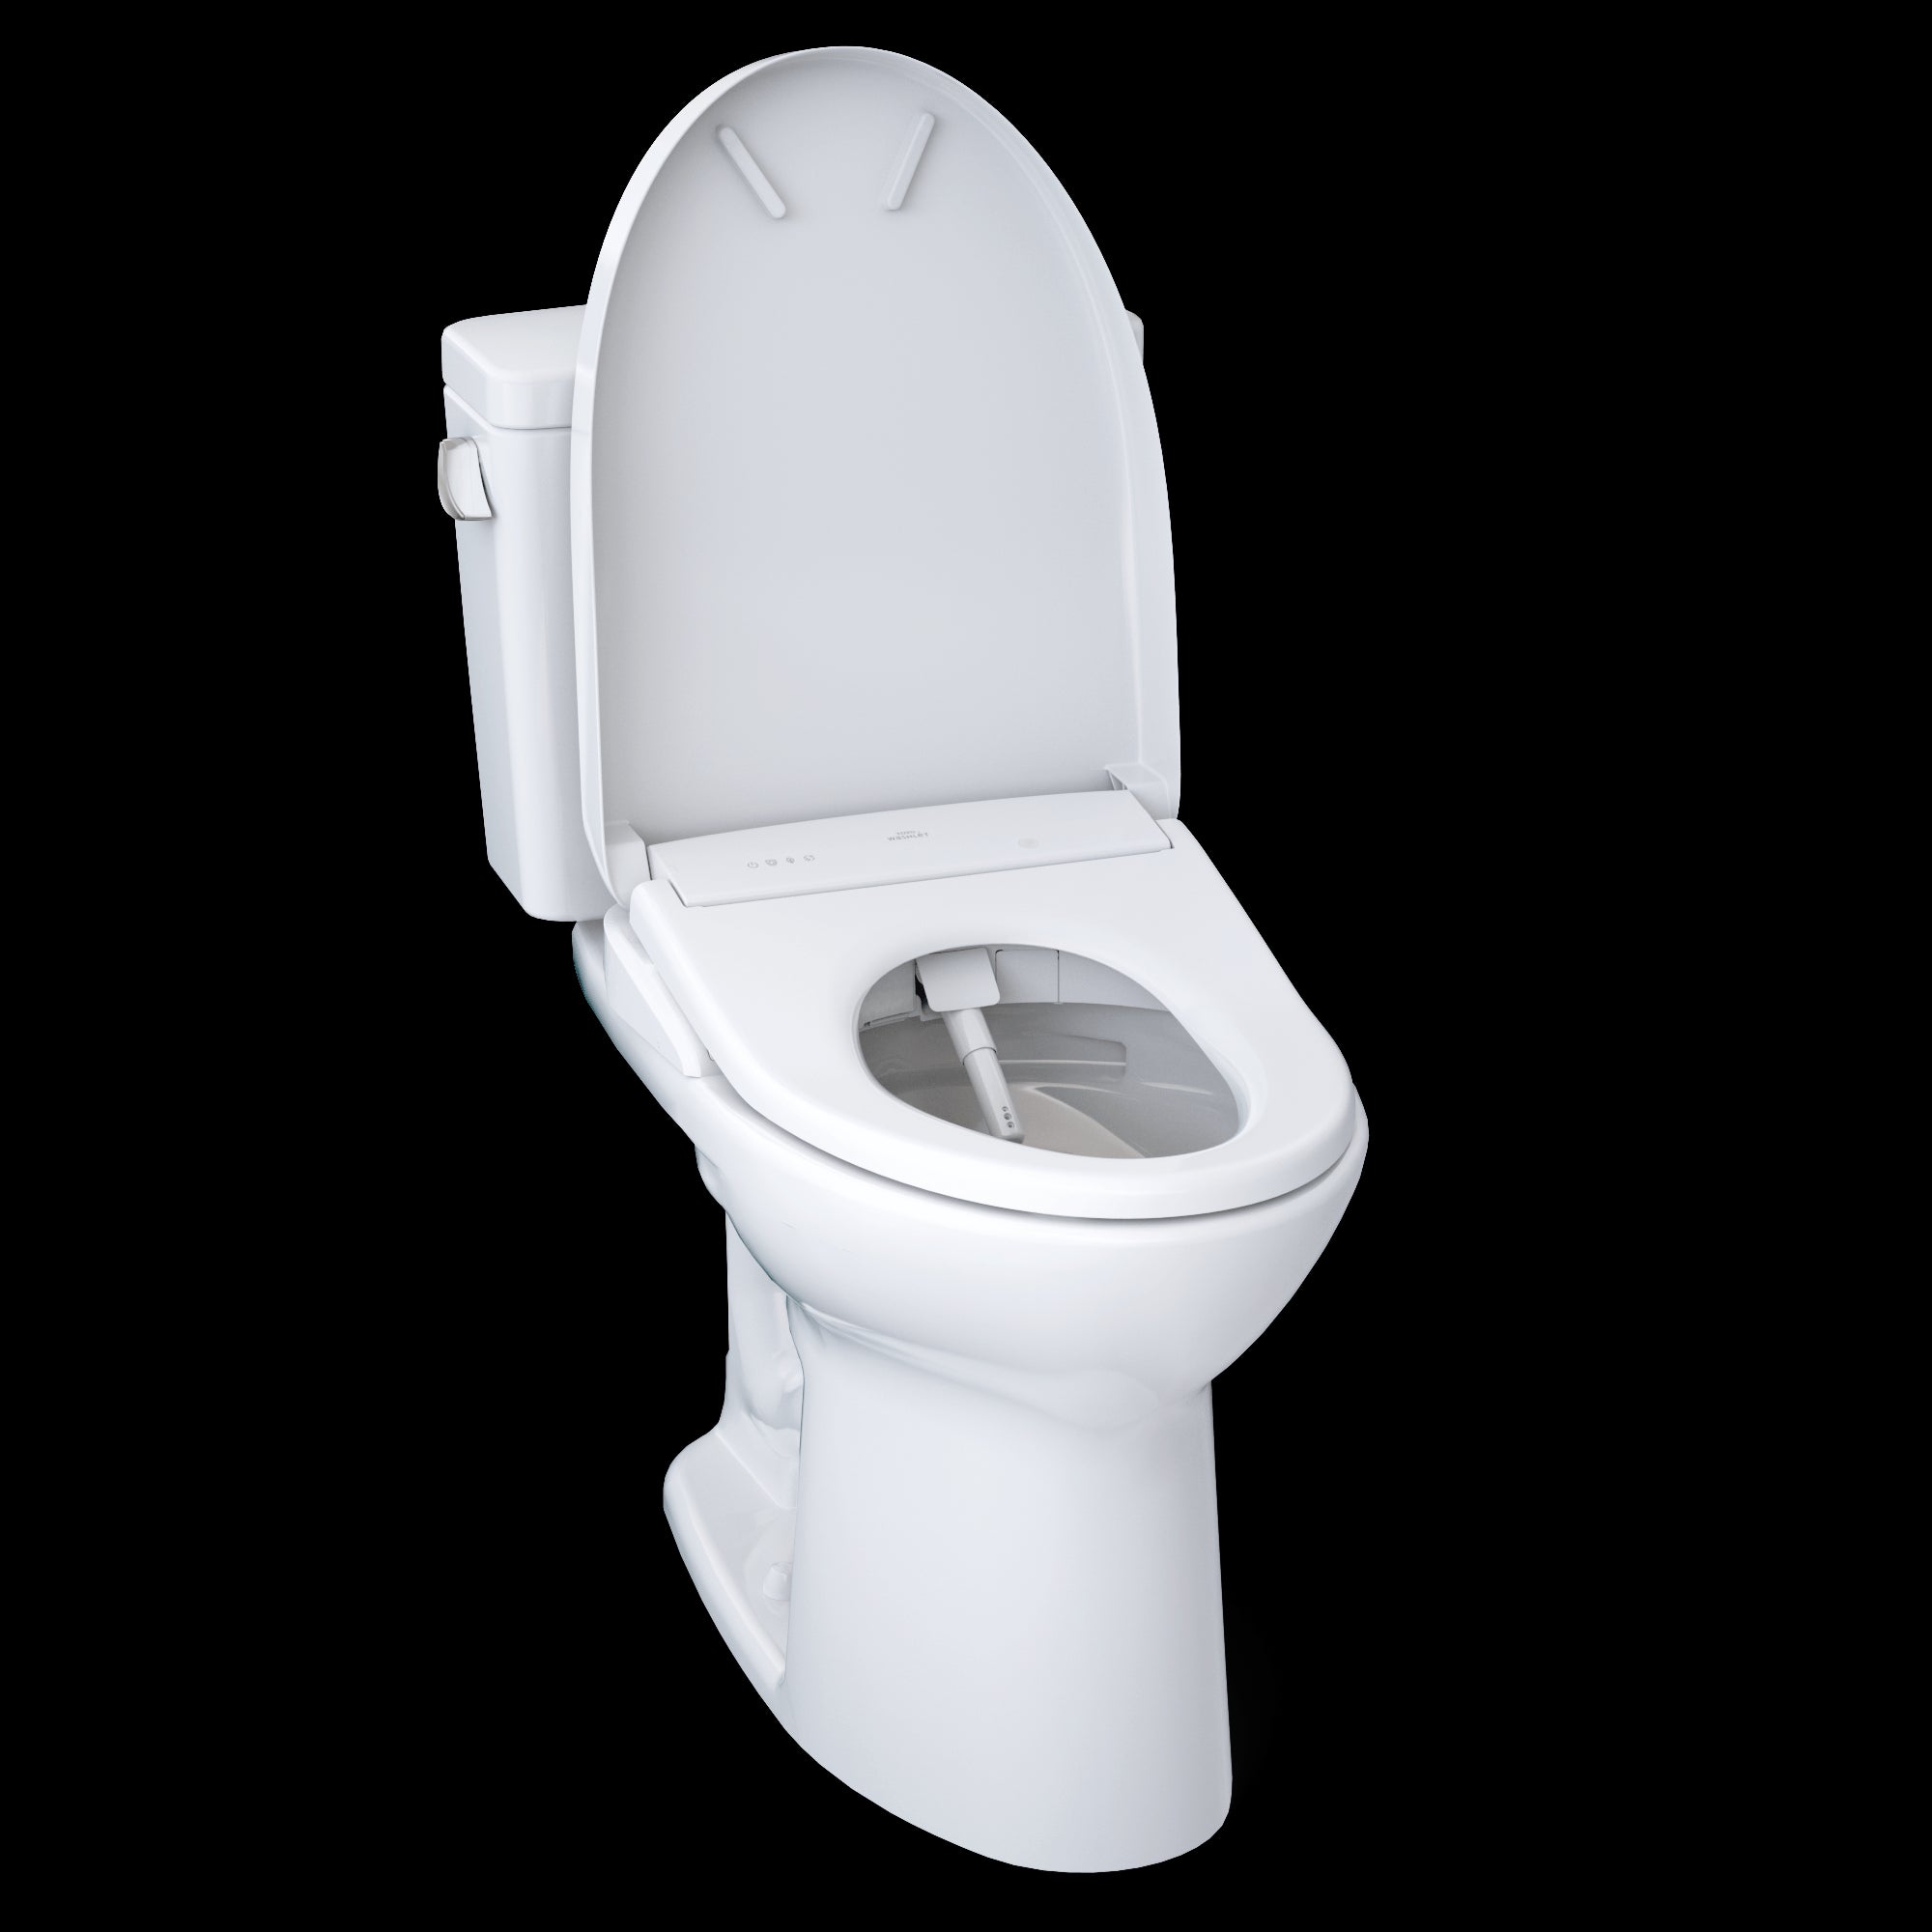 TOTO Drake 1.6 GPF with S7A Contemporary Bidet Seat | MW7764736CSG#01